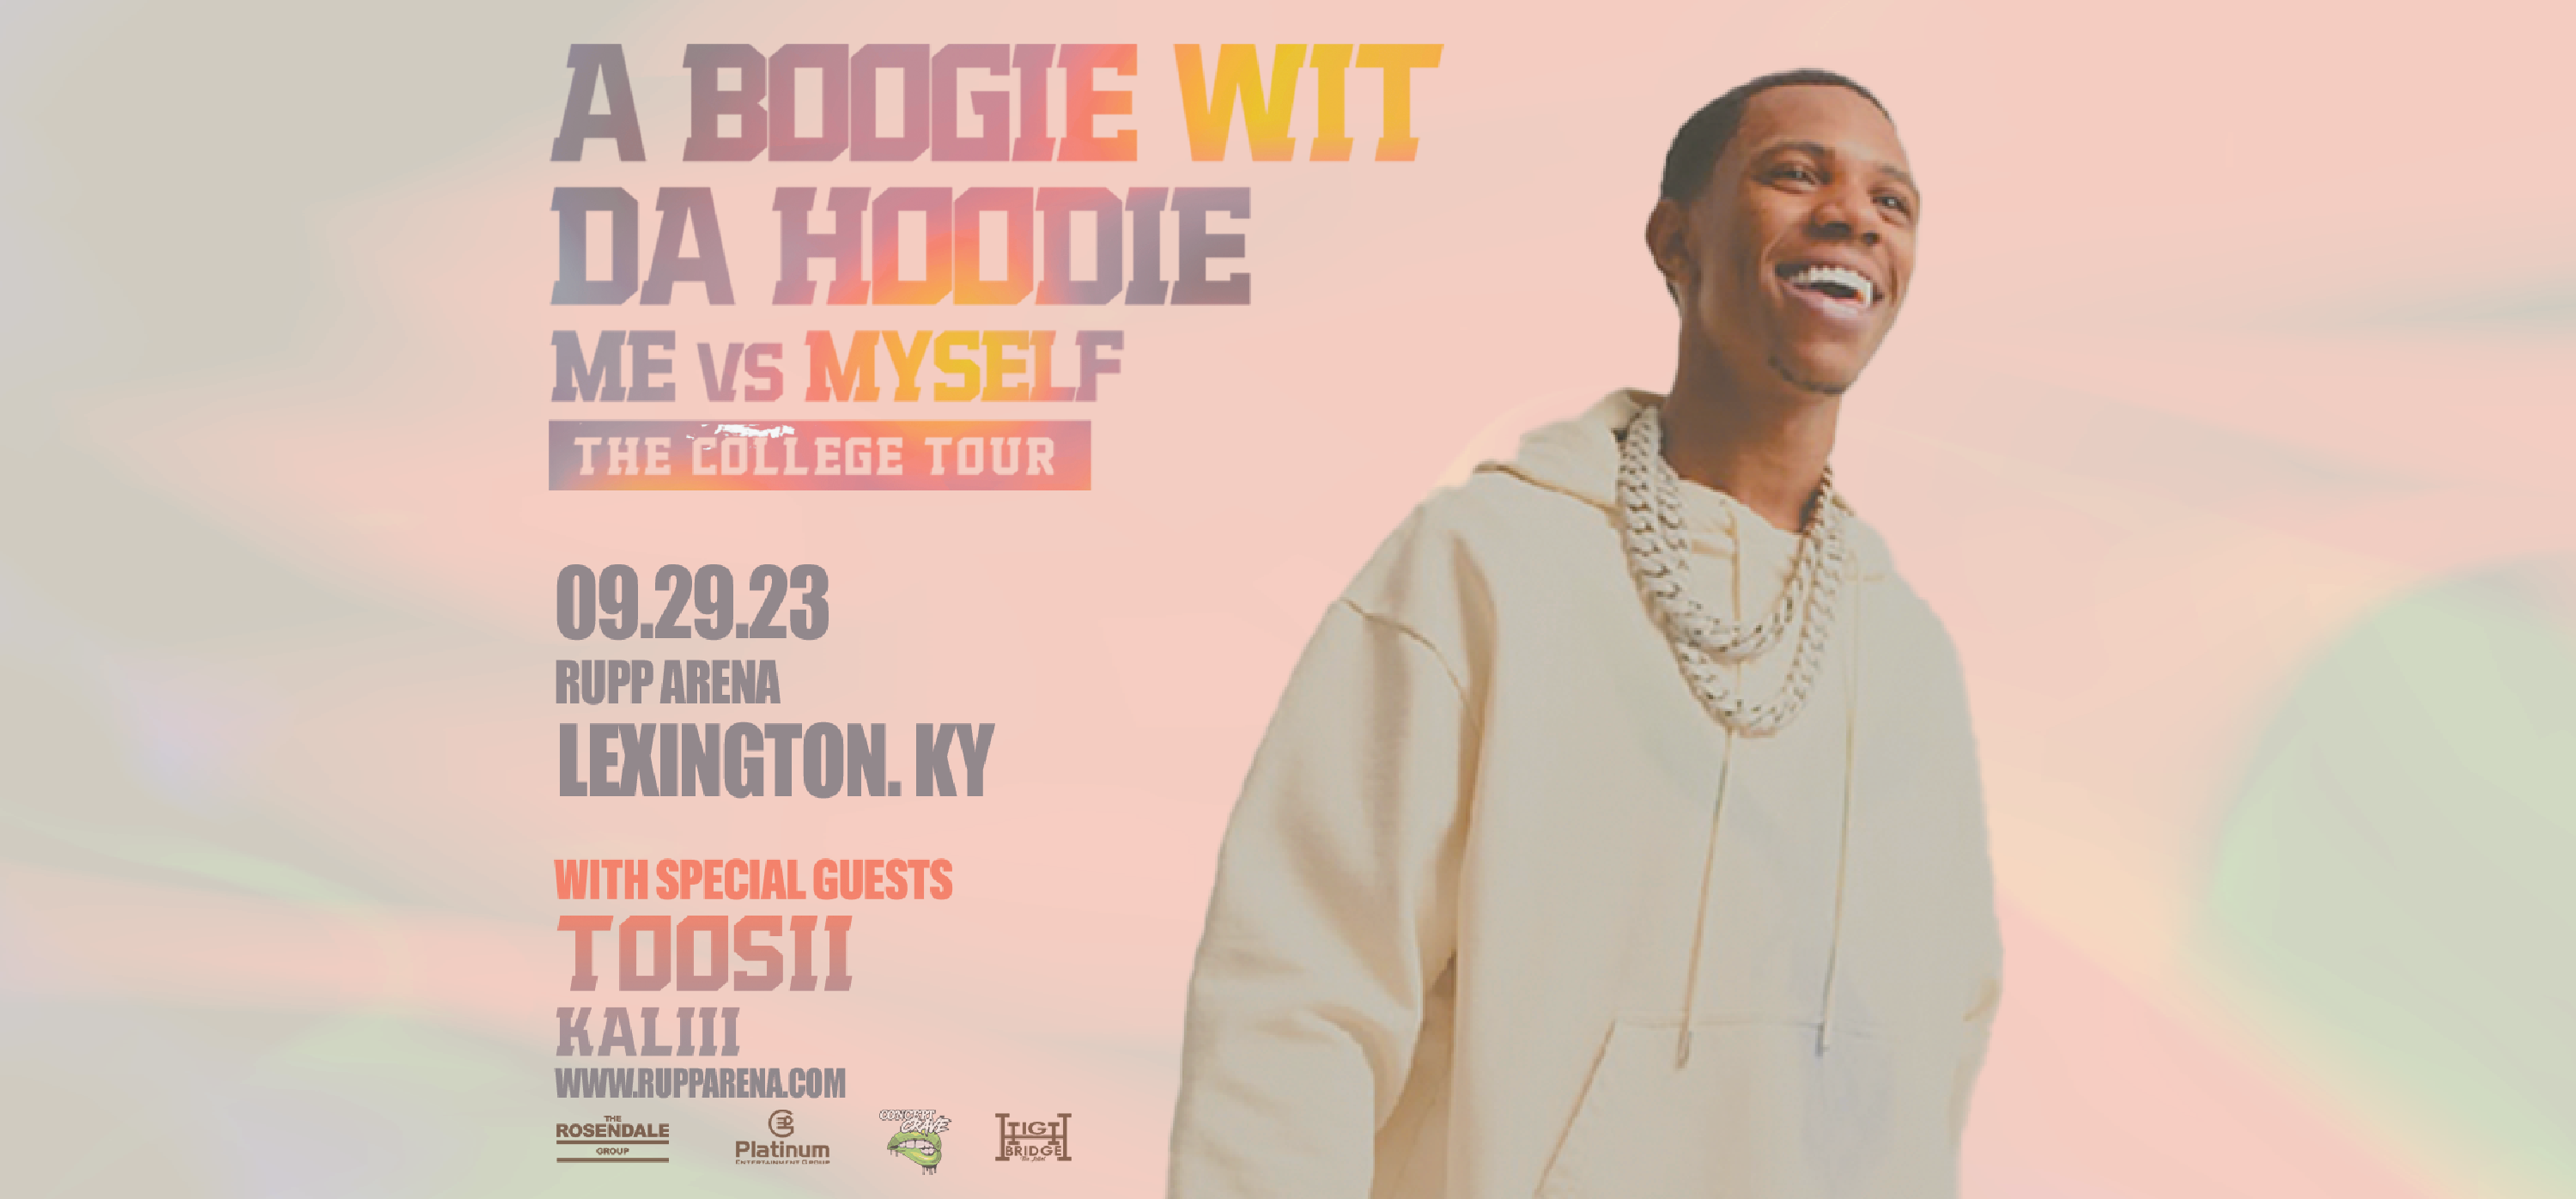 A Boogie Wit Da Hoodie tour 2023: Where to buy tickets, prices